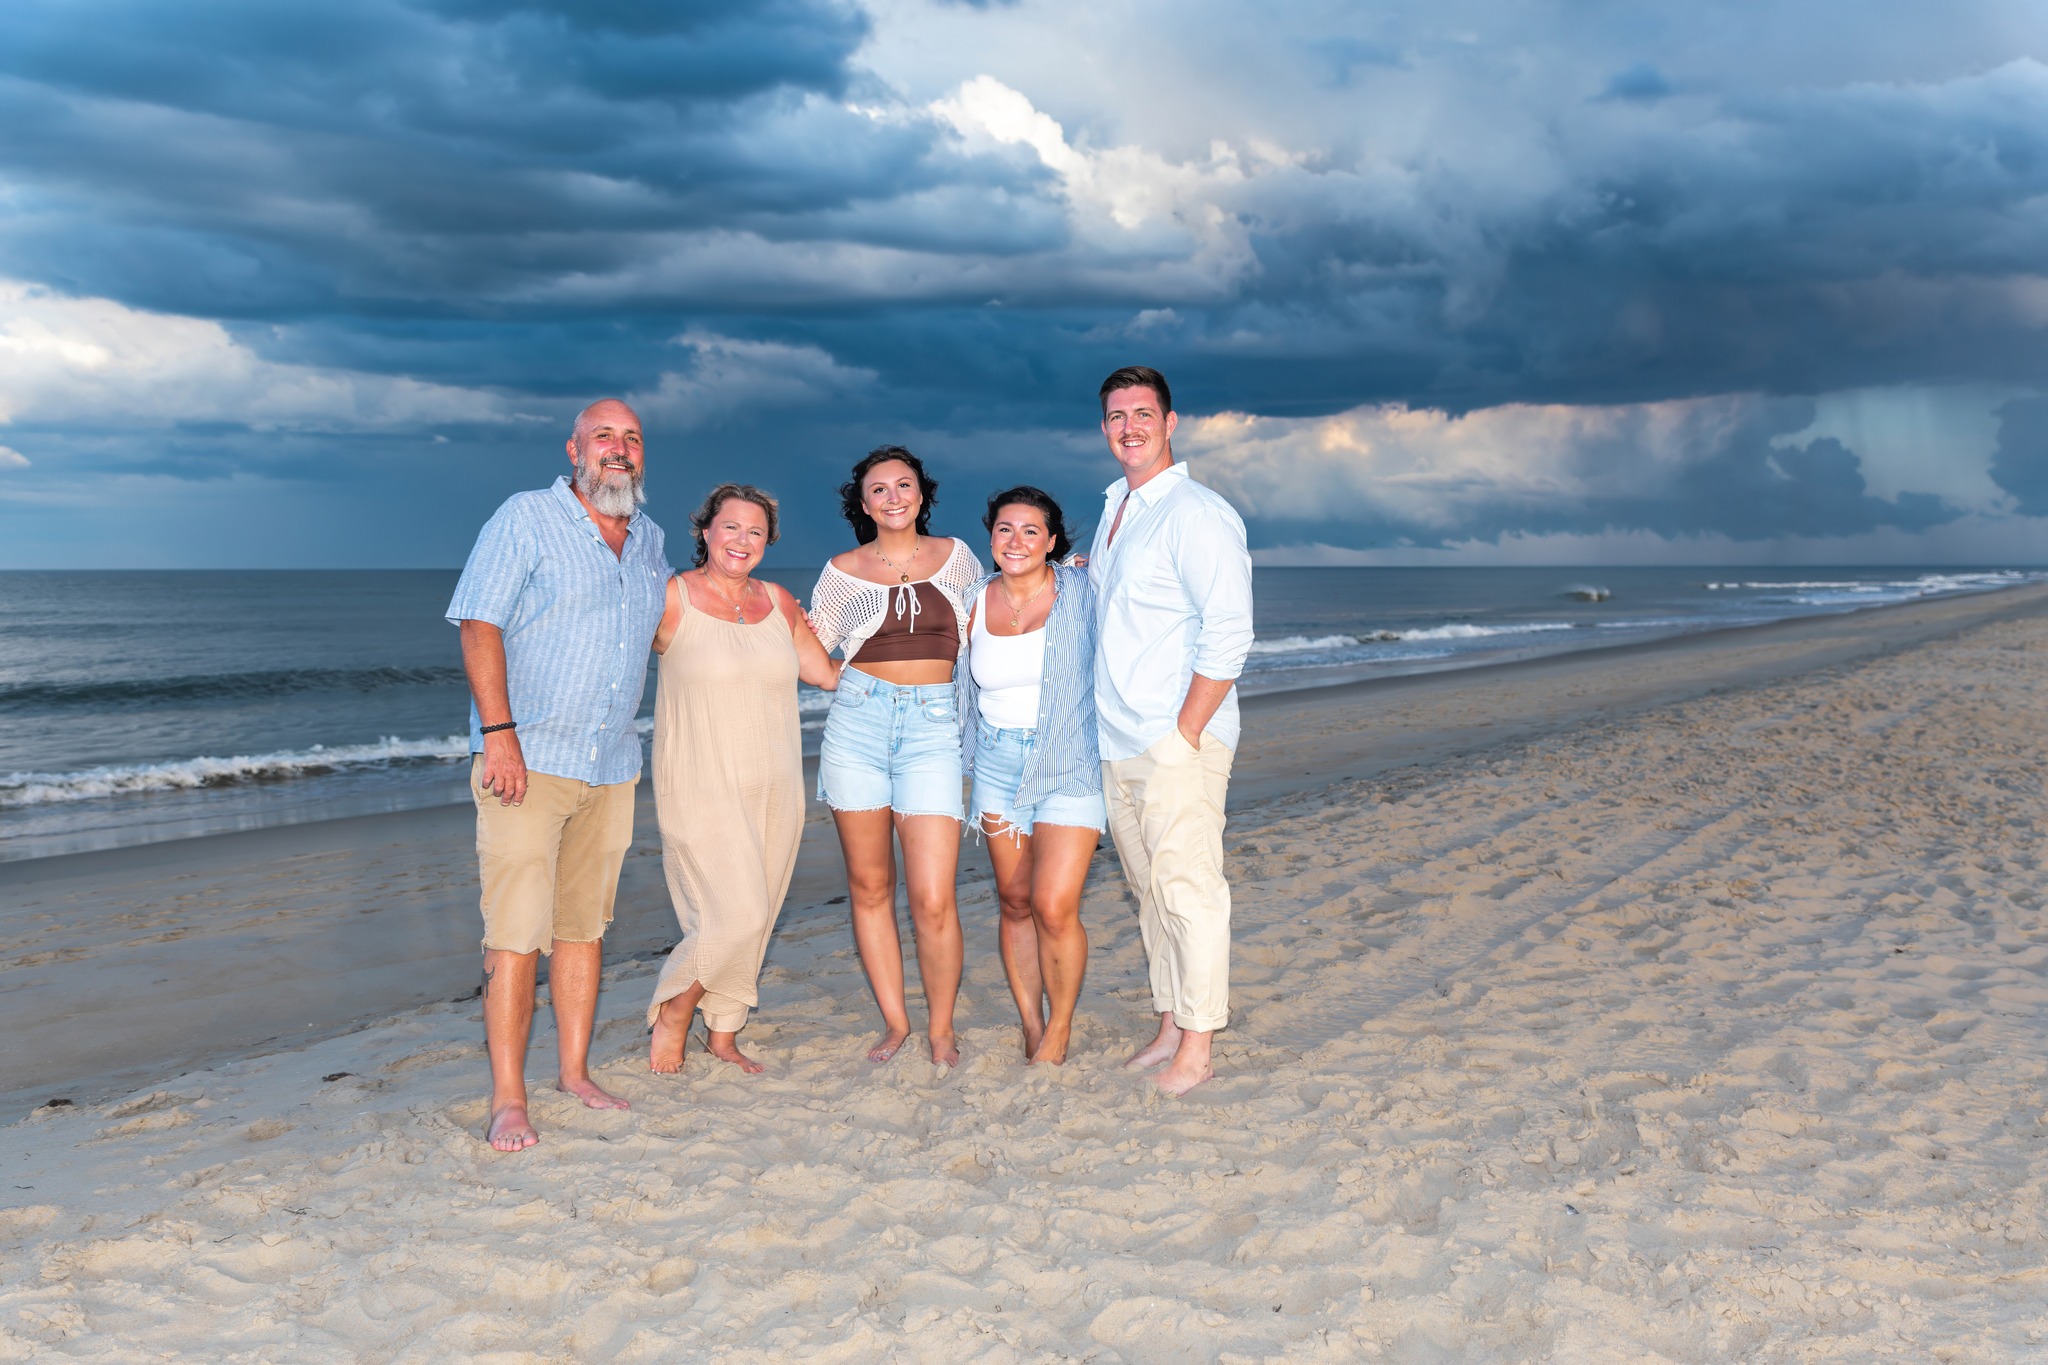 obx family beach photography and weddings mary ks photography obxfamily on beach stormy sky nags head obx